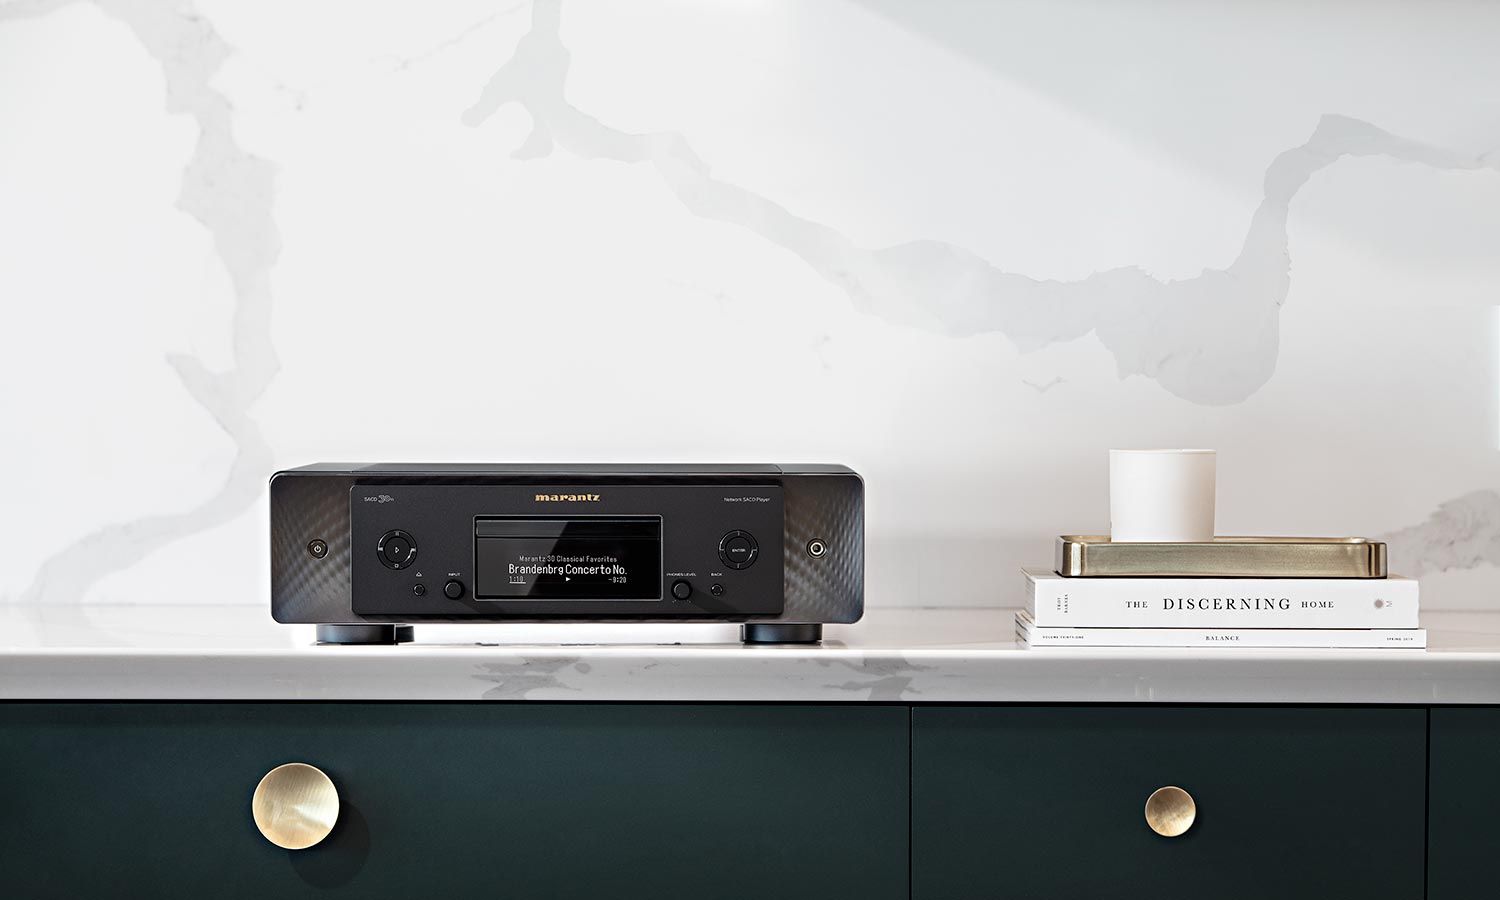 Marantz audio receiver displayed on a stylish console, highlighting its sleek design and high-end functionality.